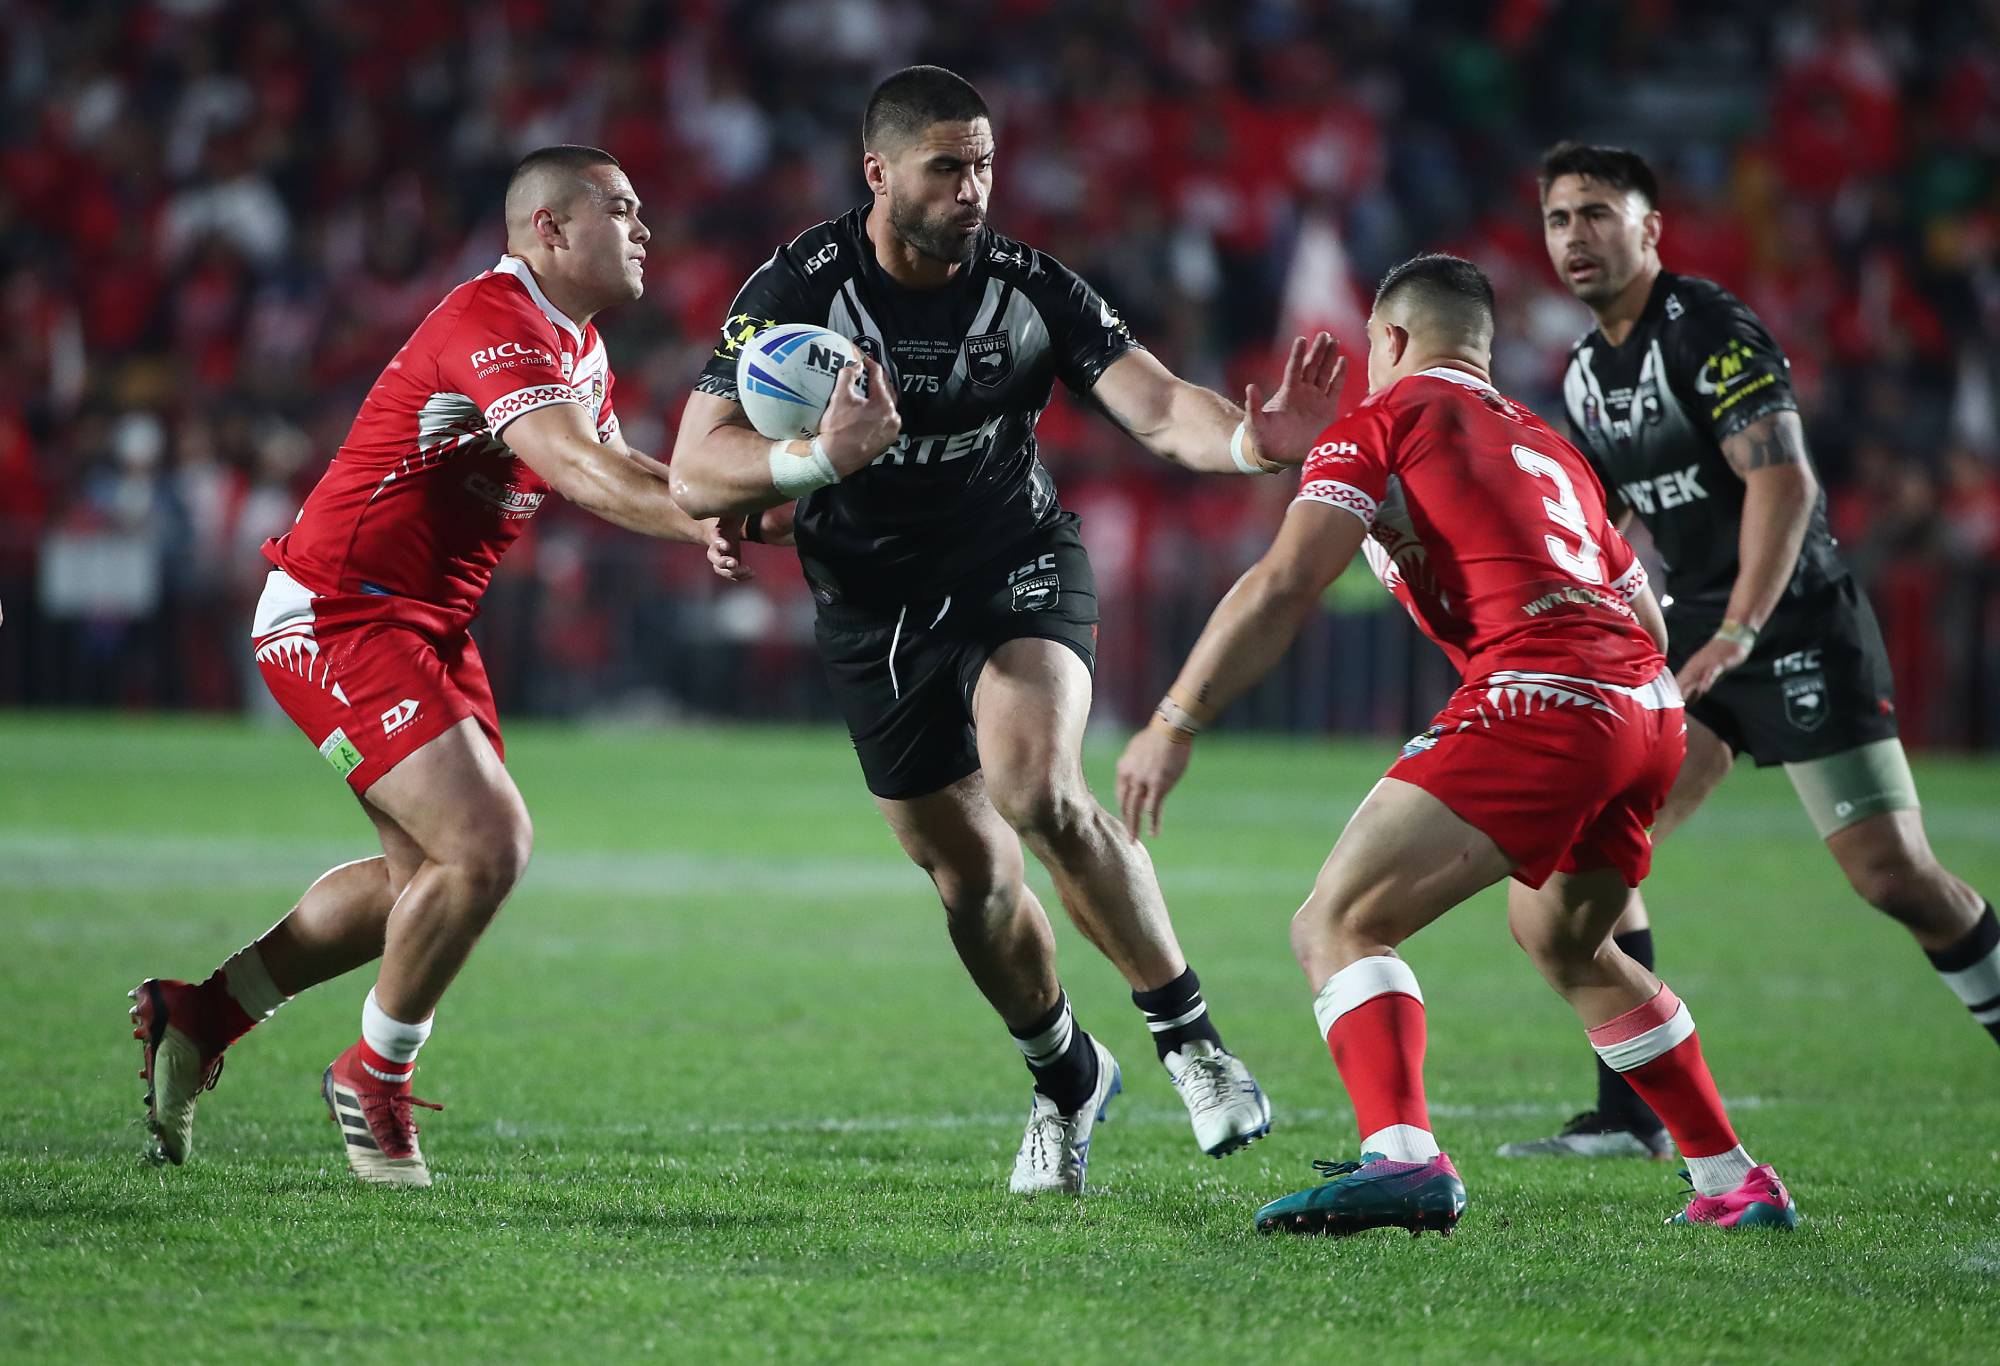 AUCKLAND, NEW ZEALAND – JUNE 22: Jesse Bromwich of the Kiwis (C) is tackled during the Oceania League Test between the Kiwis and Mate Ma'a Tonga at Mt Smart Stadium on June 22, 2019 in Auckland, New Zealand. Zeeland.  (Photo by Fiona Goodall/Getty Images)